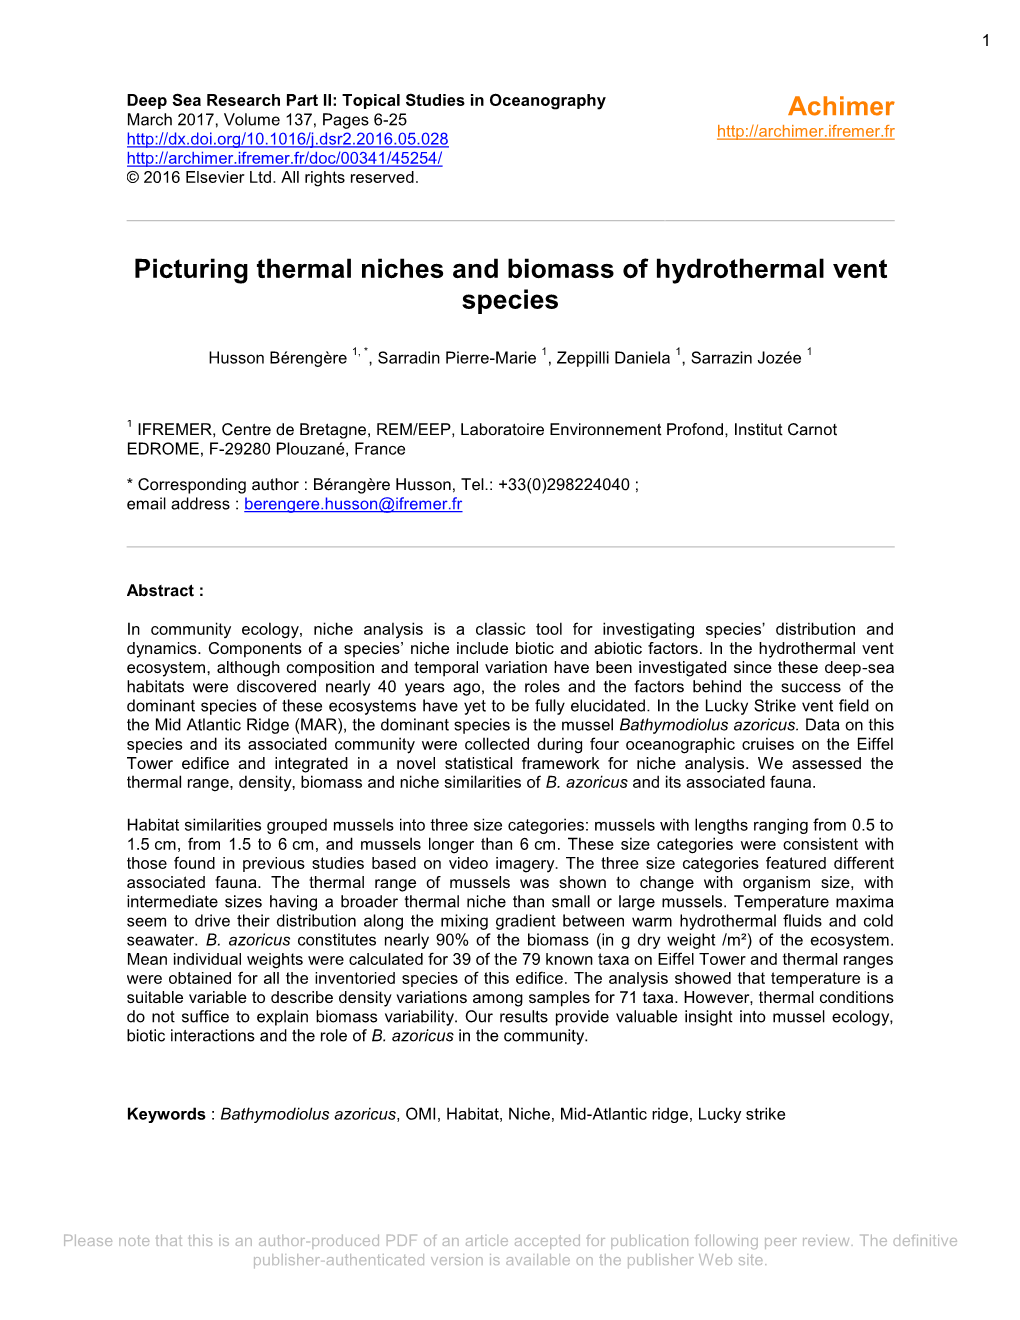 Picturing Thermal Niches and Biomass of Hydrothermal Vent Species